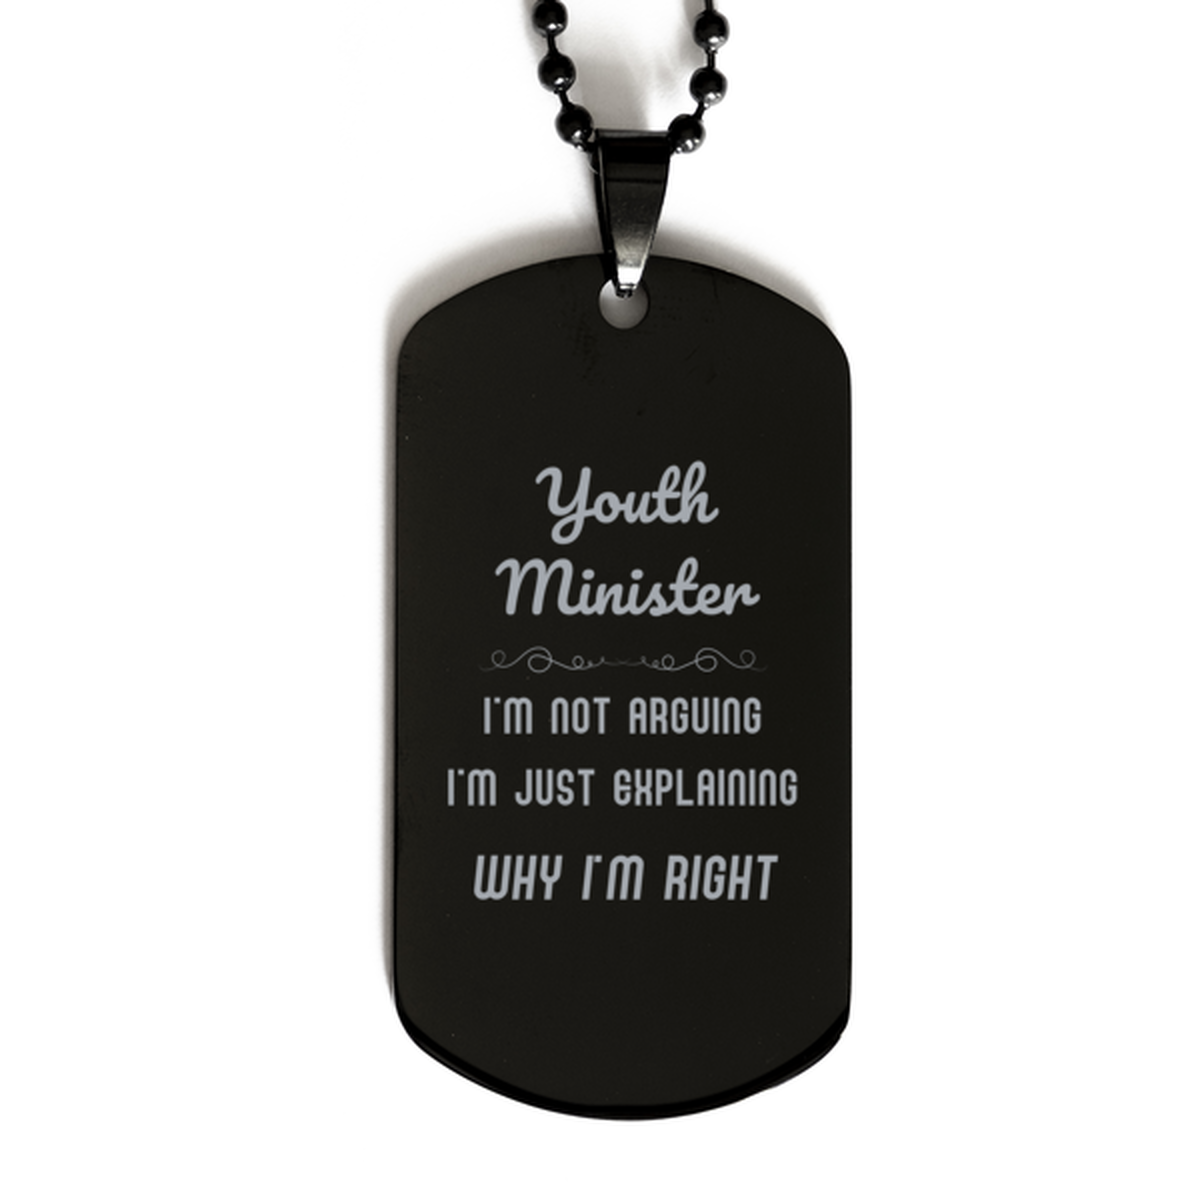 Youth Minister I'm not Arguing. I'm Just Explaining Why I'm RIGHT Black Dog Tag, Funny Saying Quote Youth Minister Gifts For Youth Minister Graduation Birthday Christmas Gifts for Men Women Coworker